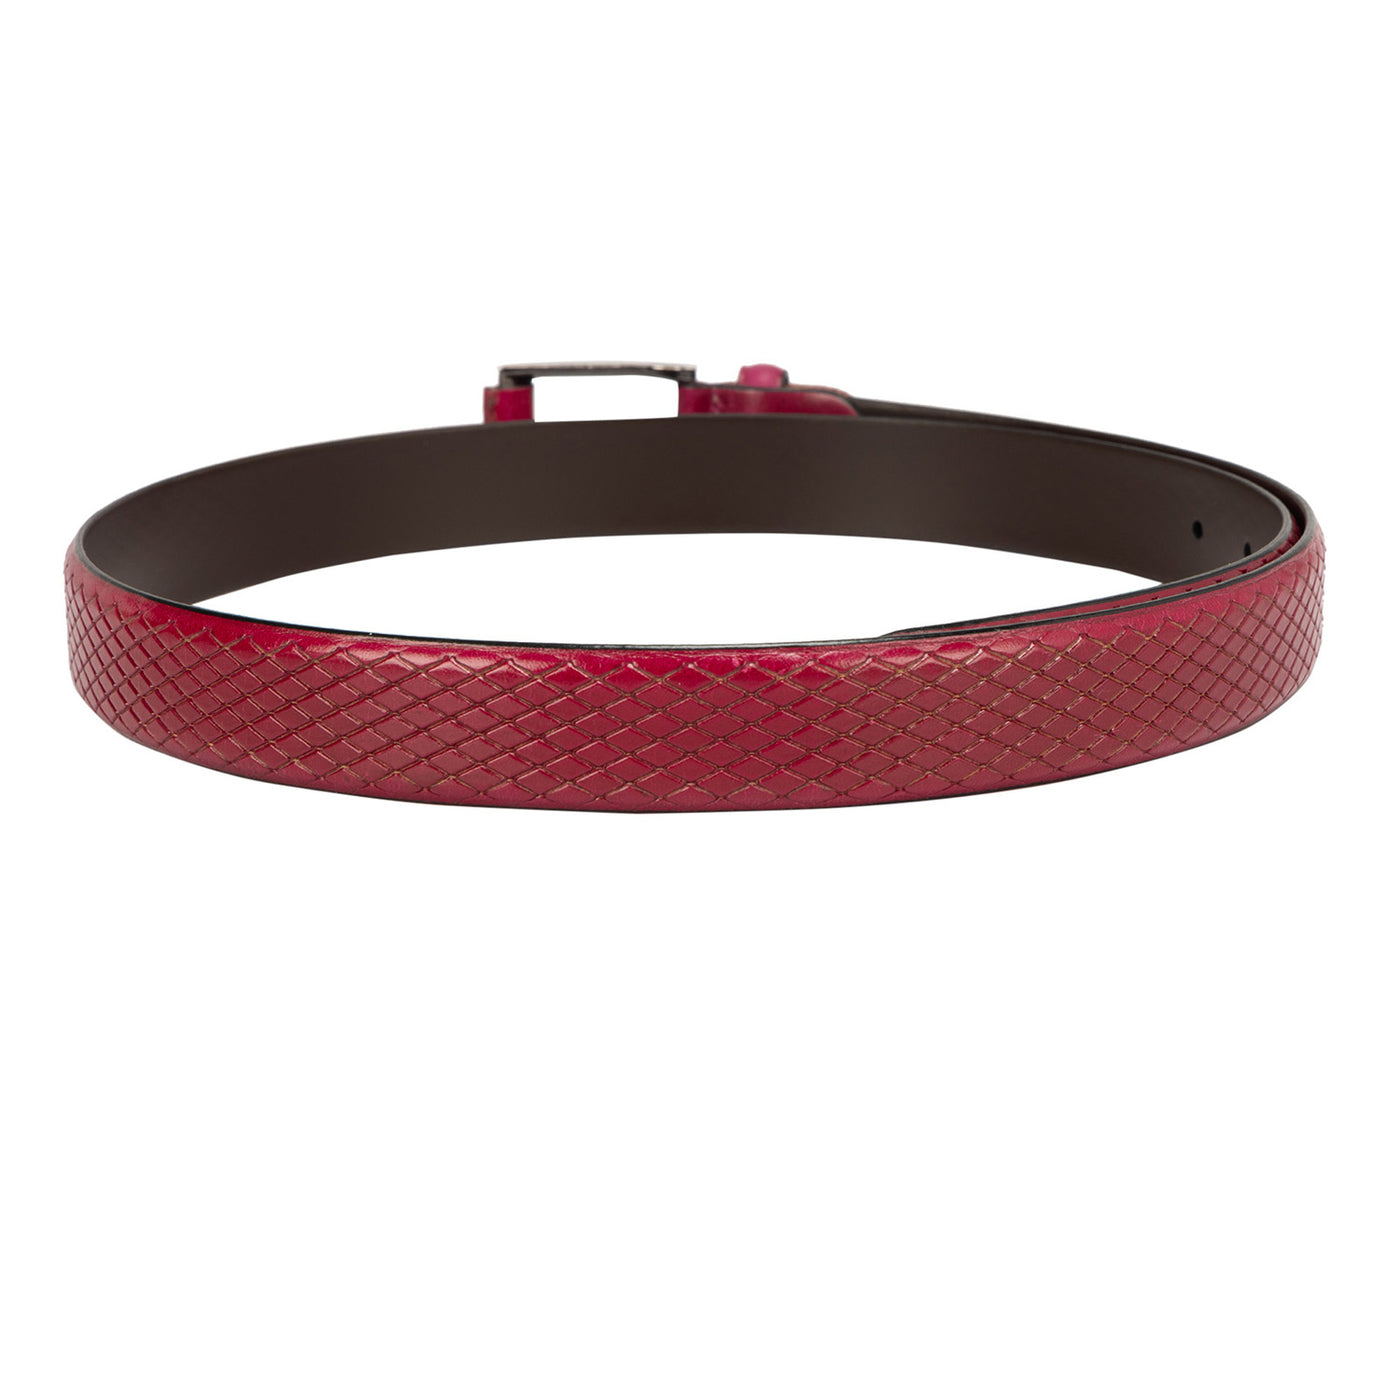 Casual Emboss Leather Ladies Belt - Pink